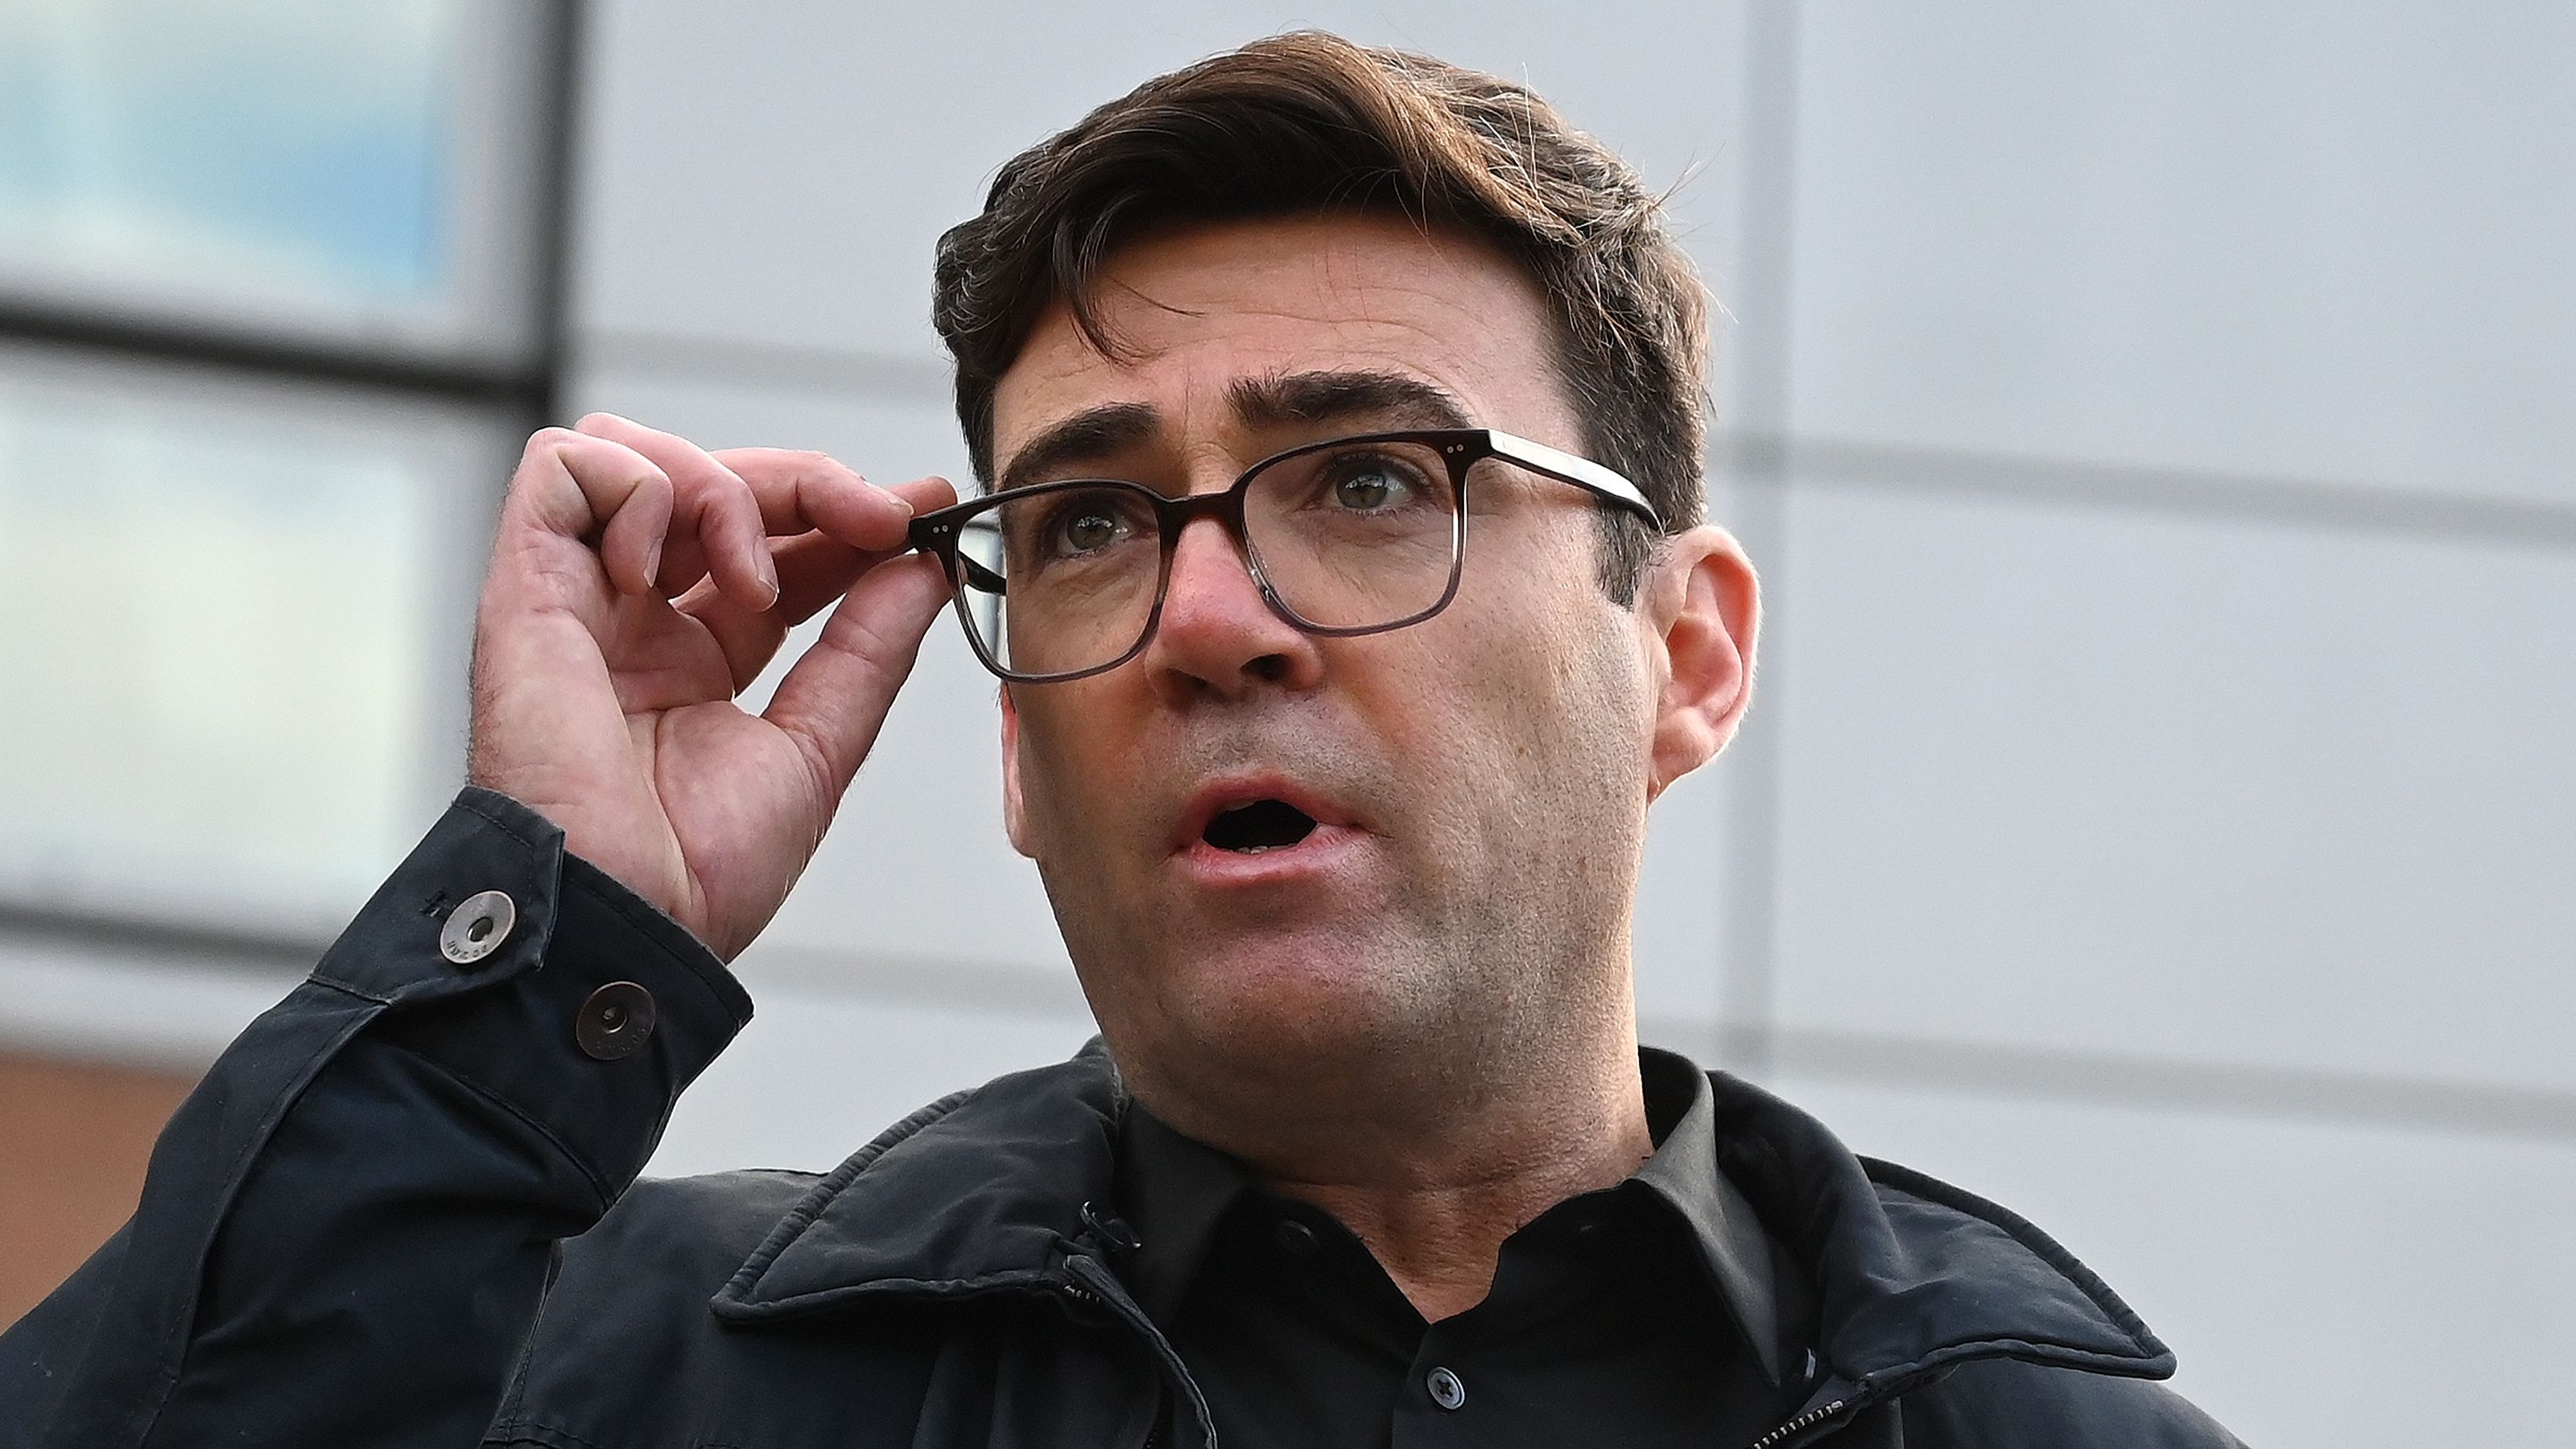 Andy Burnham speaks to the media at a press conference outside The Bridgewater Hall in Manchester.